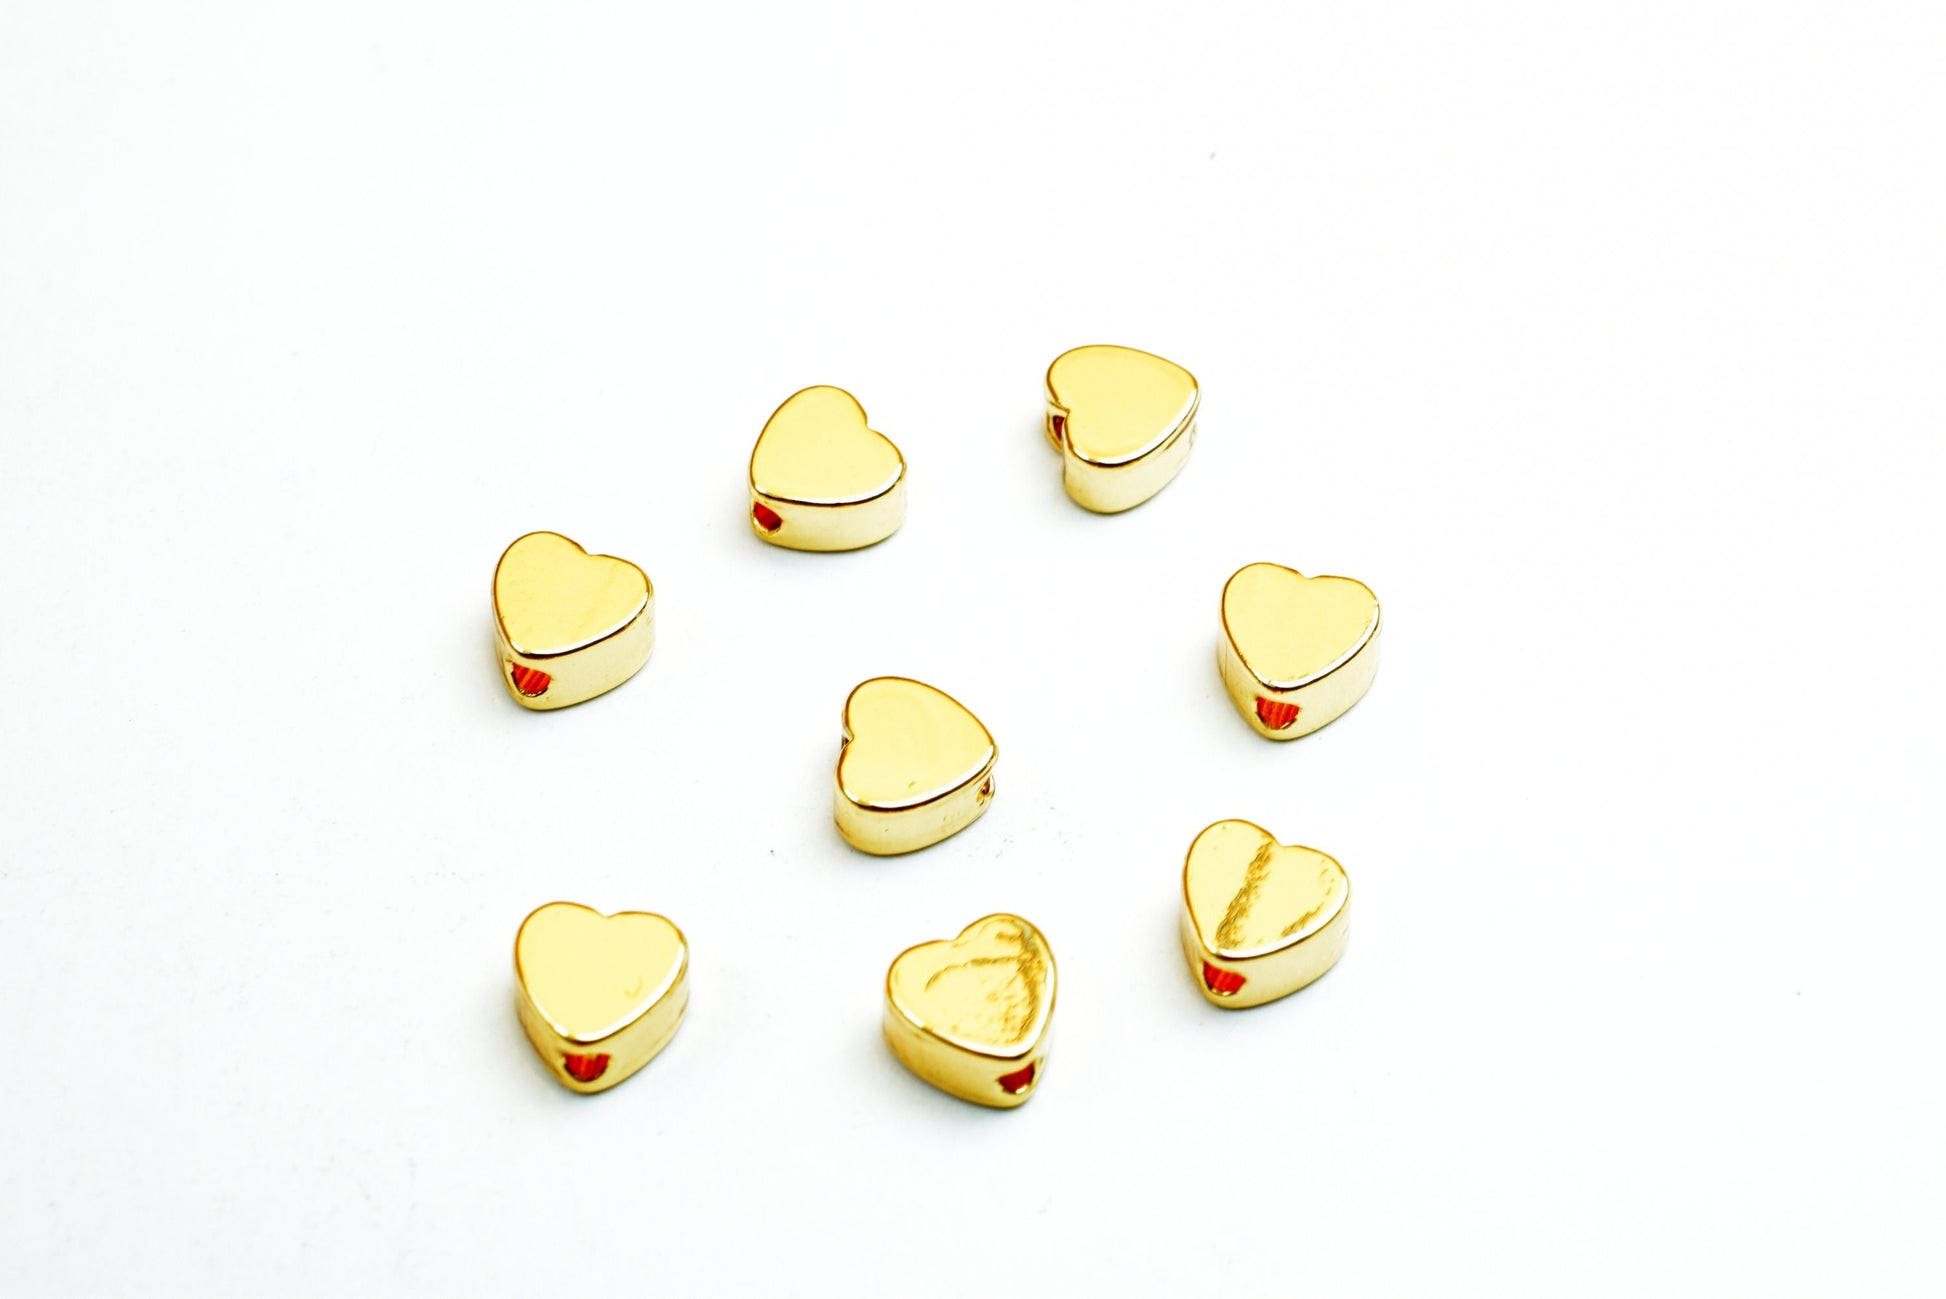 18k gold filled EP heart beads size 5mm/6mm, solid spacer beads, 25 pcs teeny tiny findings for jewelry making gf06/gf06a/gf06b BeadsFindingDepot